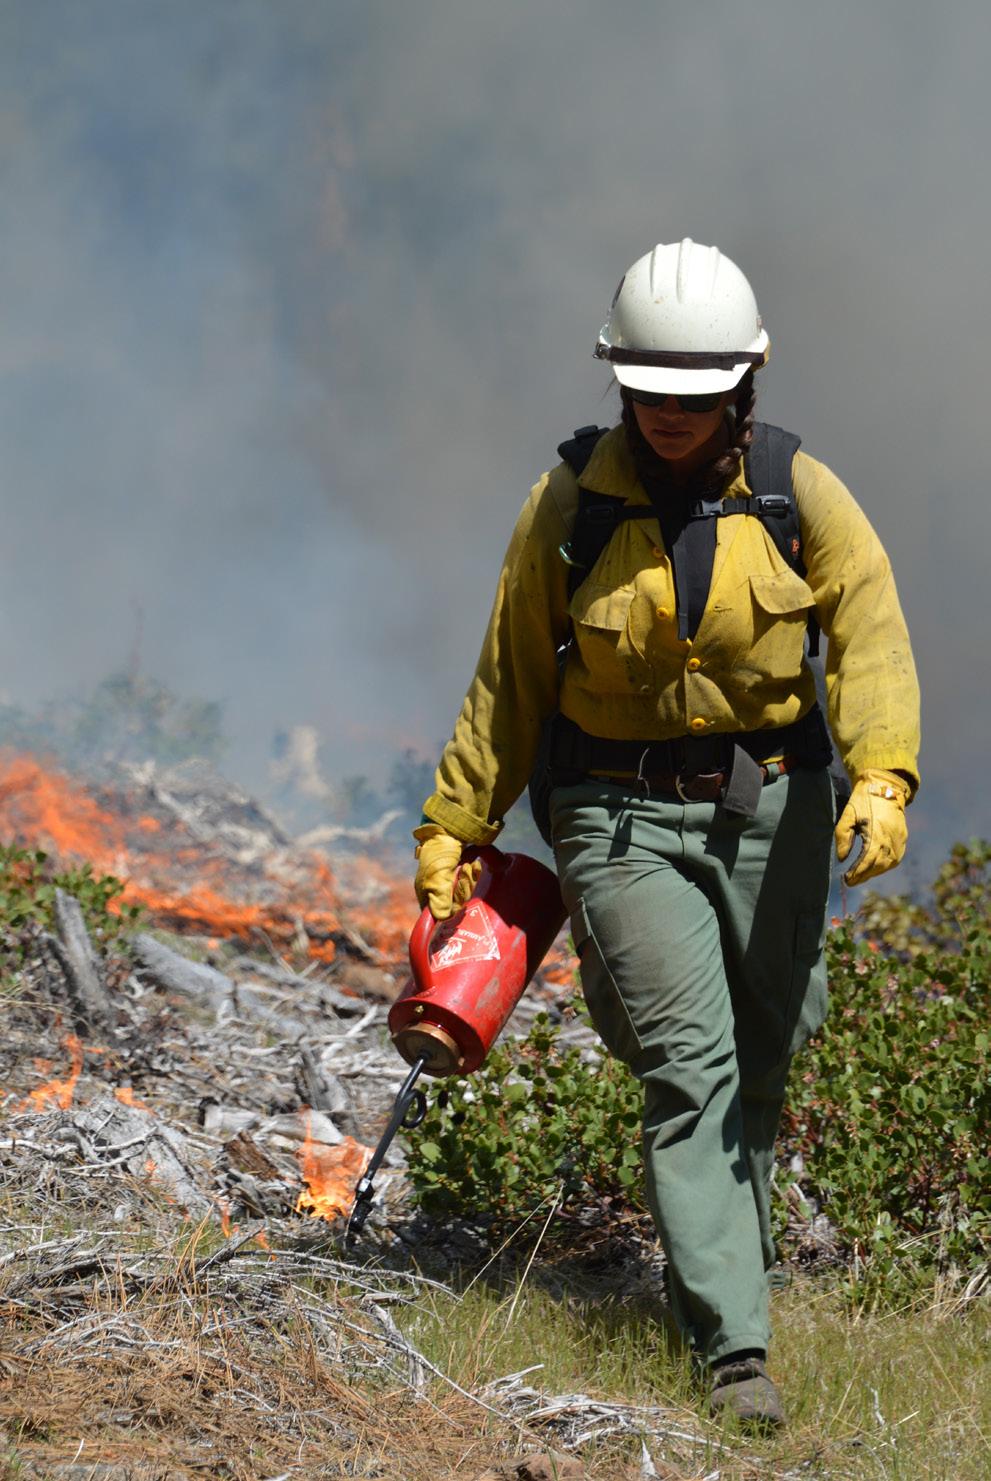 Rangeland Fire Prevention, Management and Restoration The Great Basin LCC has been heavily involved in efforts related to Secretarial Order 3336: Rangeland Fire Prevention, Management and Restoration.